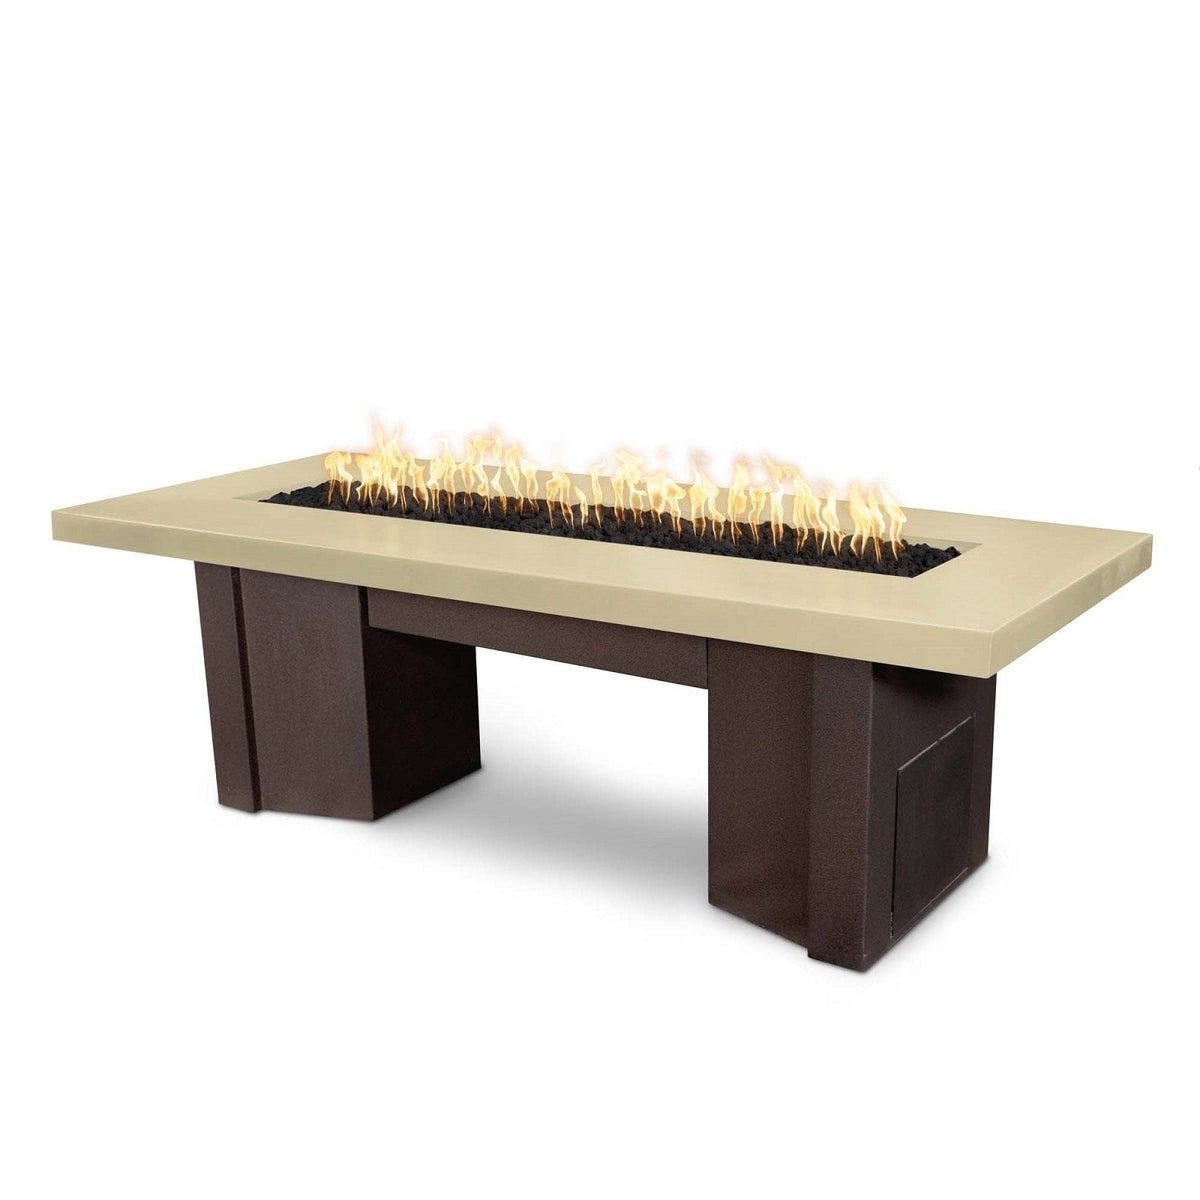 The Outdoor Plus Fire Features Vanilla (-VAN) / Java Powder Coated Steel (-JAV) The Outdoor Plus 60&quot; Alameda Fire Table Smooth Concrete in Liquid Propane - Flame Sense System with Push Button Spark Igniter / OPT-ALMGFRC60FSEN-LP